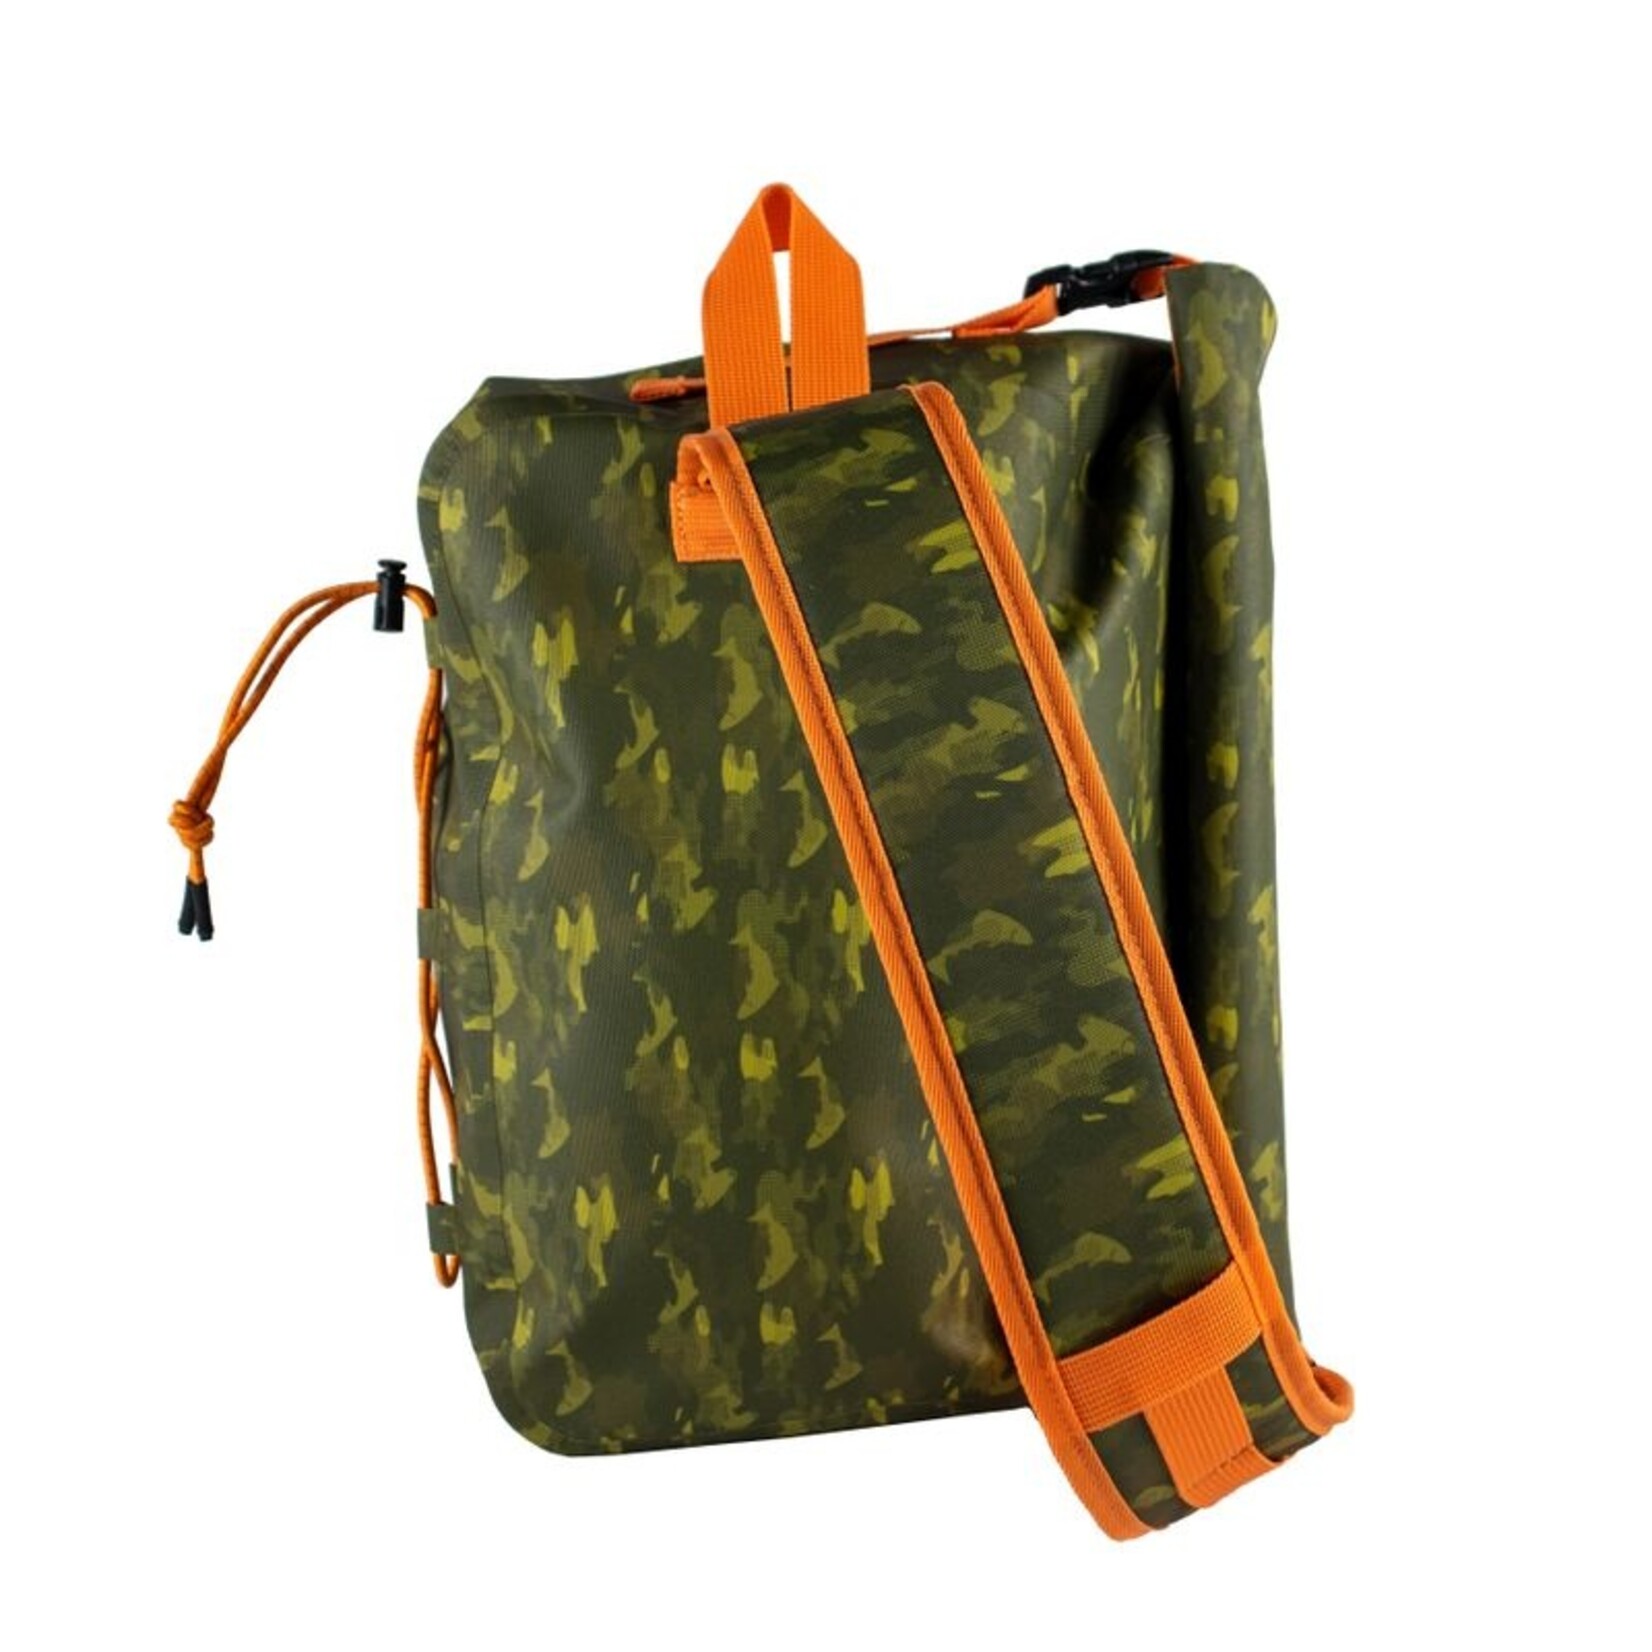 Chums Chums Rolltop Sling